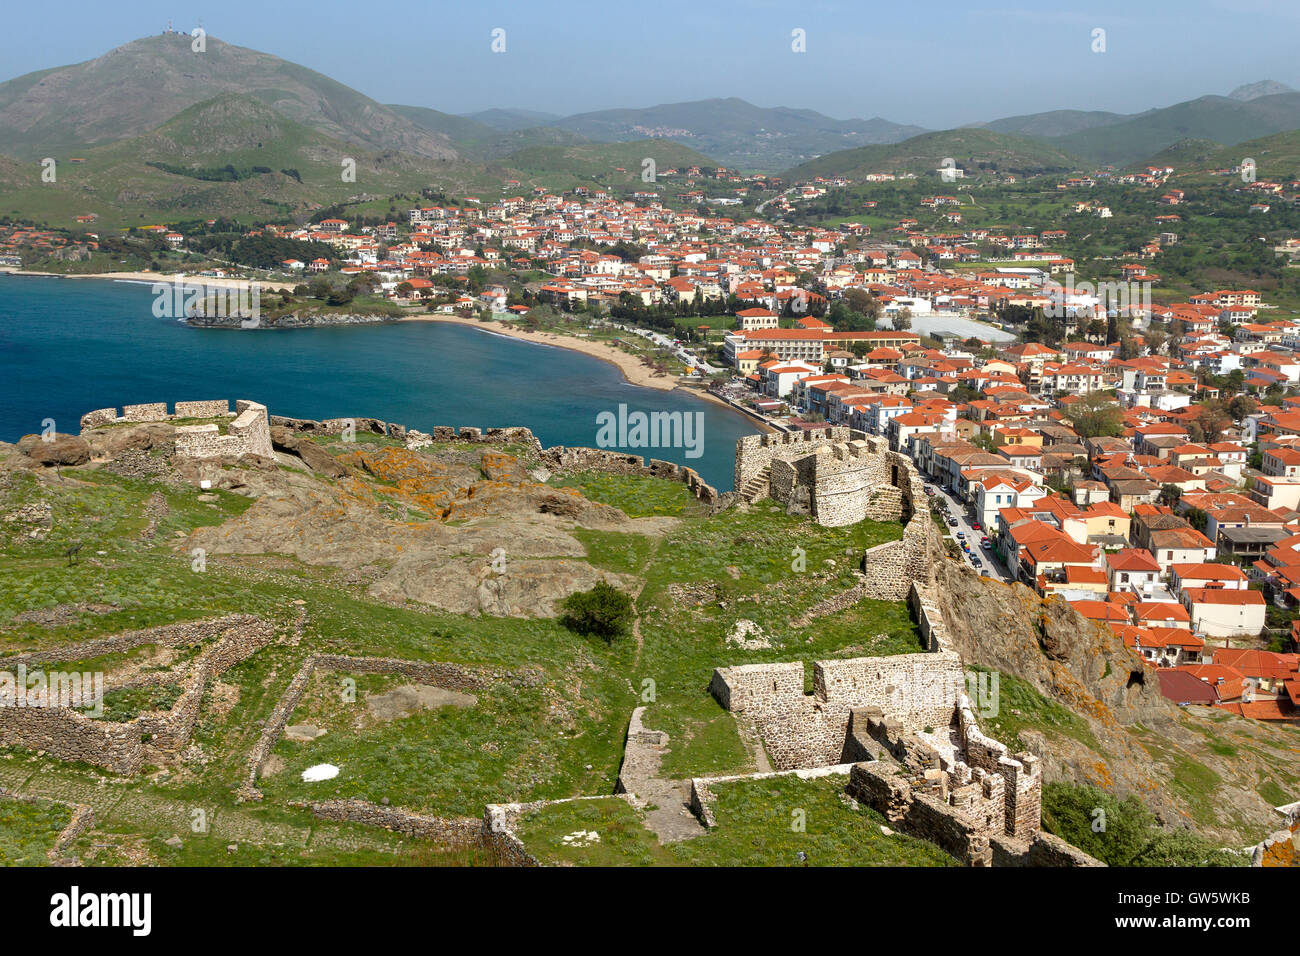 The town of Myrina, in Lemnos island, Greece, and part of the castle of the town. The local medieval castle is one the largest in the Mediterranean. Stock Photo